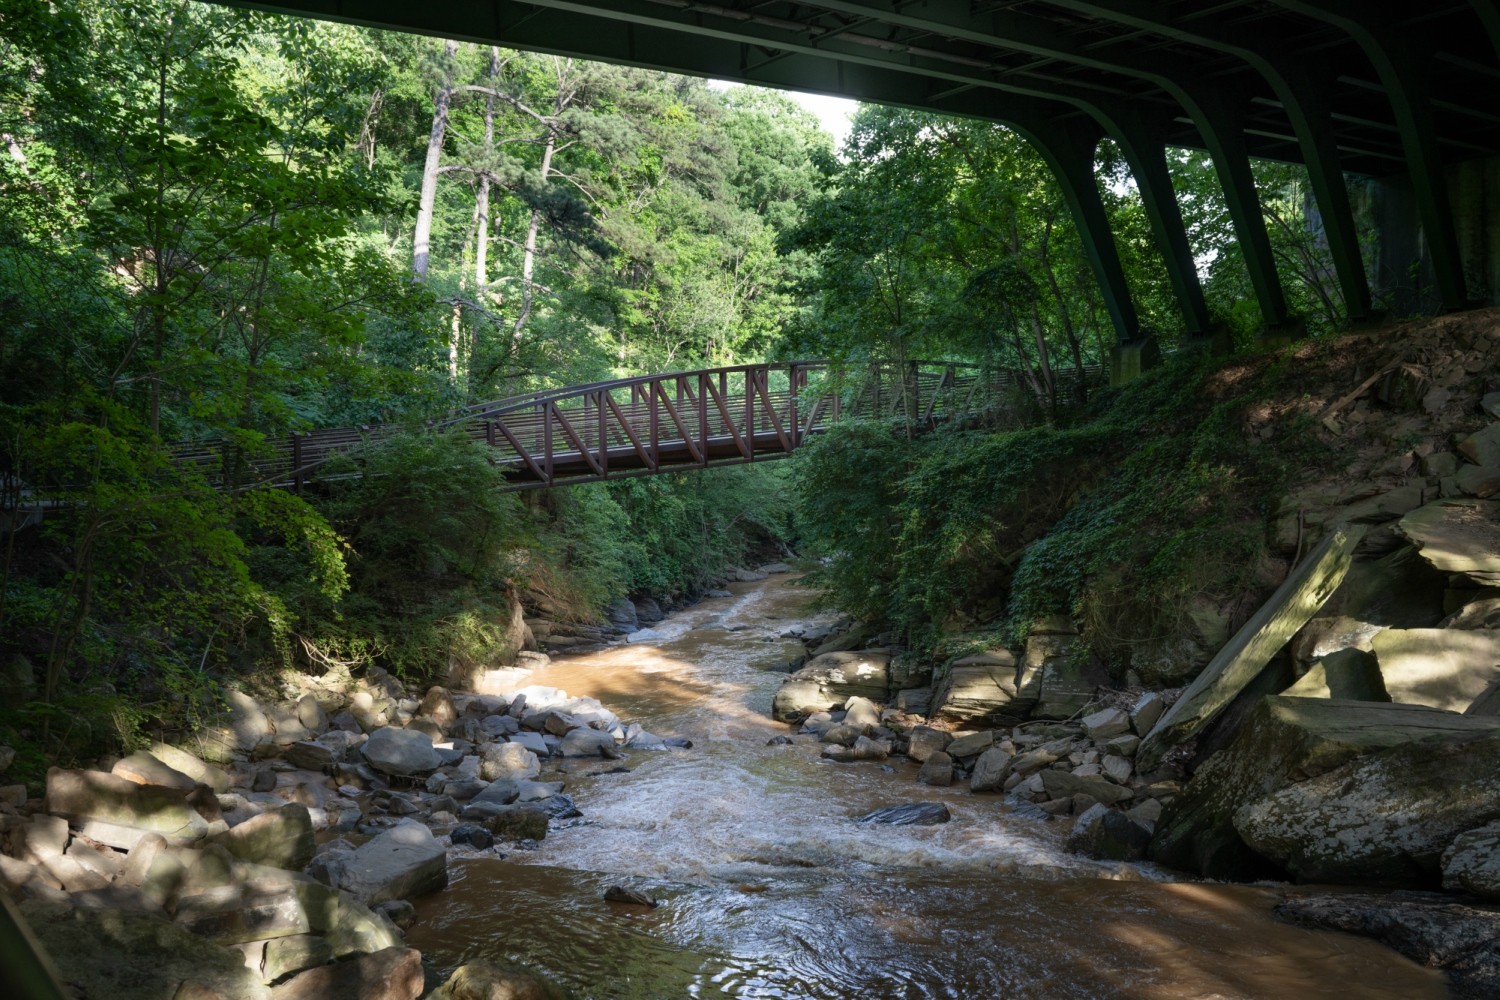 The West Palisades Trail explores the scenic Paces Mill Park near Vinings, one of the Chattahoochee River’s most popular recreation areas in metro Atlanta.